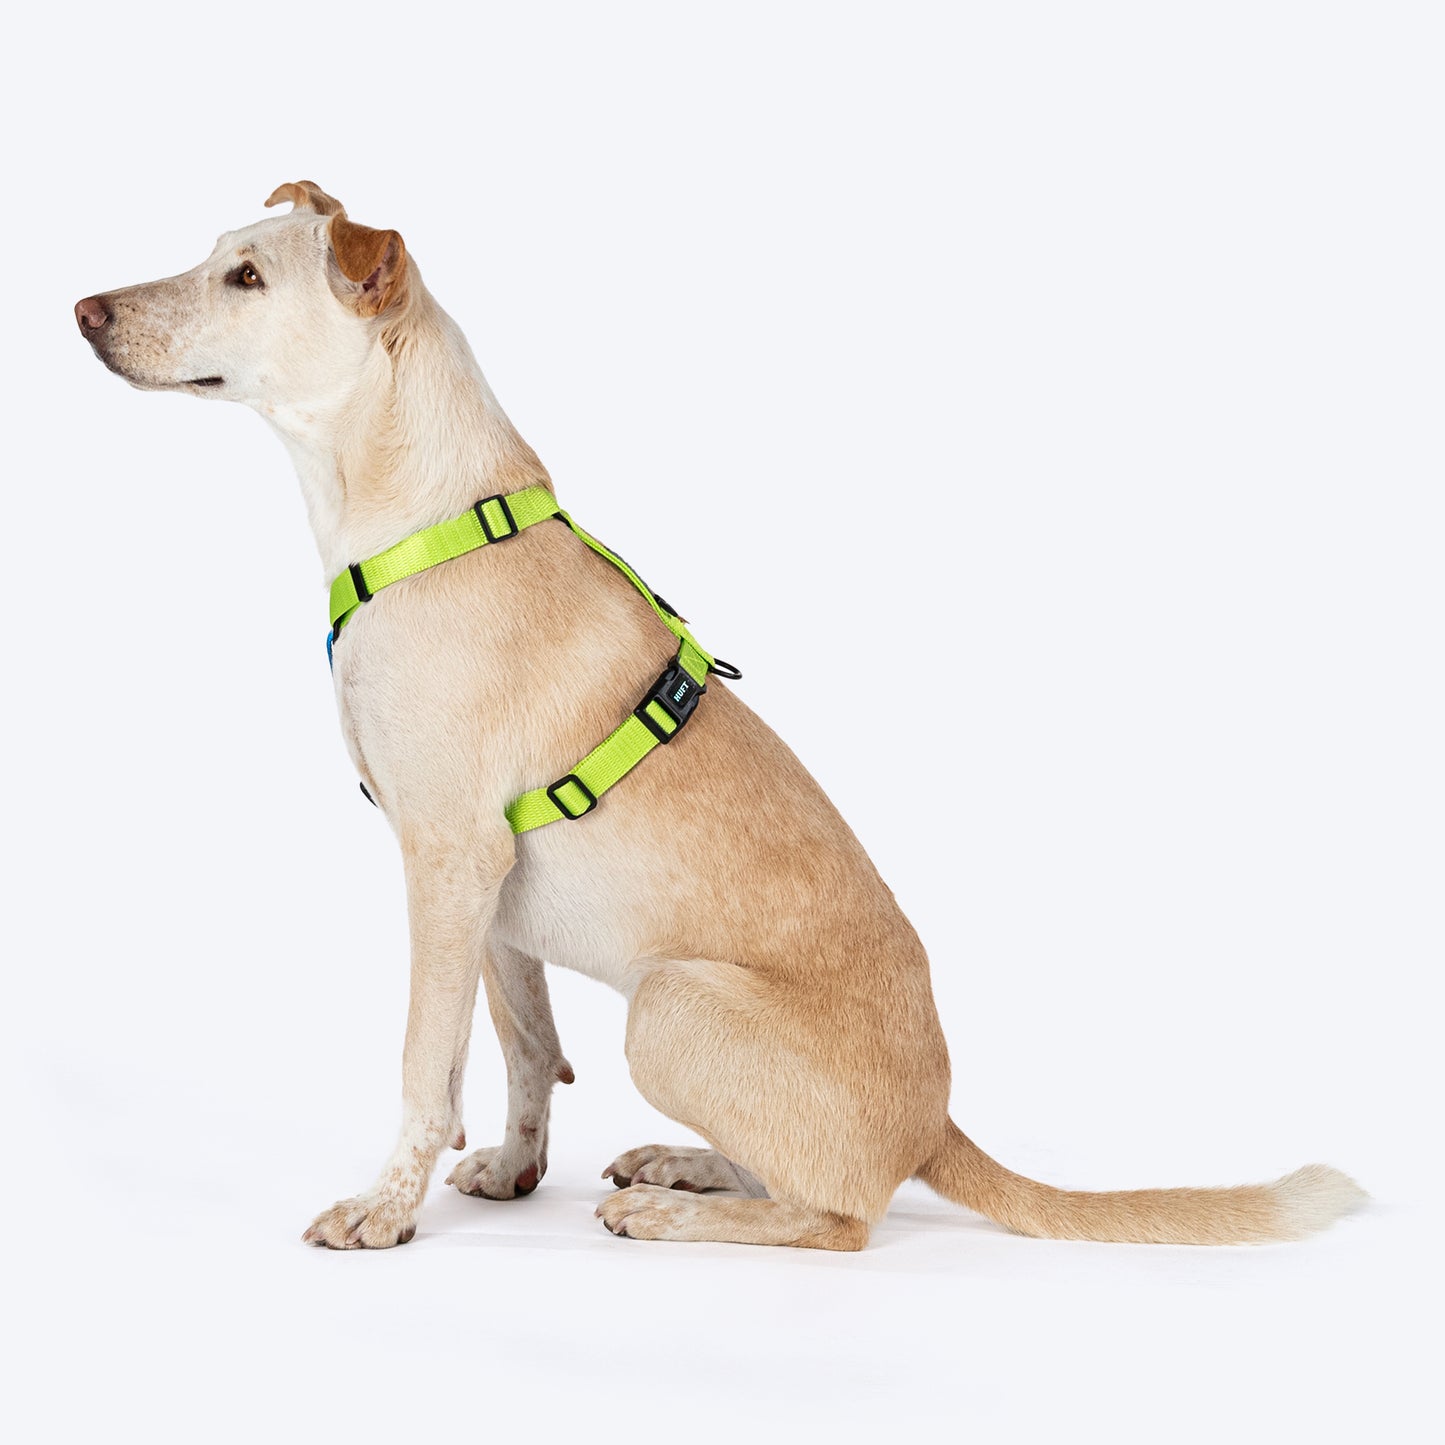 HUFT Basics Dog H-Harness - Neon Green & Blue - Heads Up For Tails